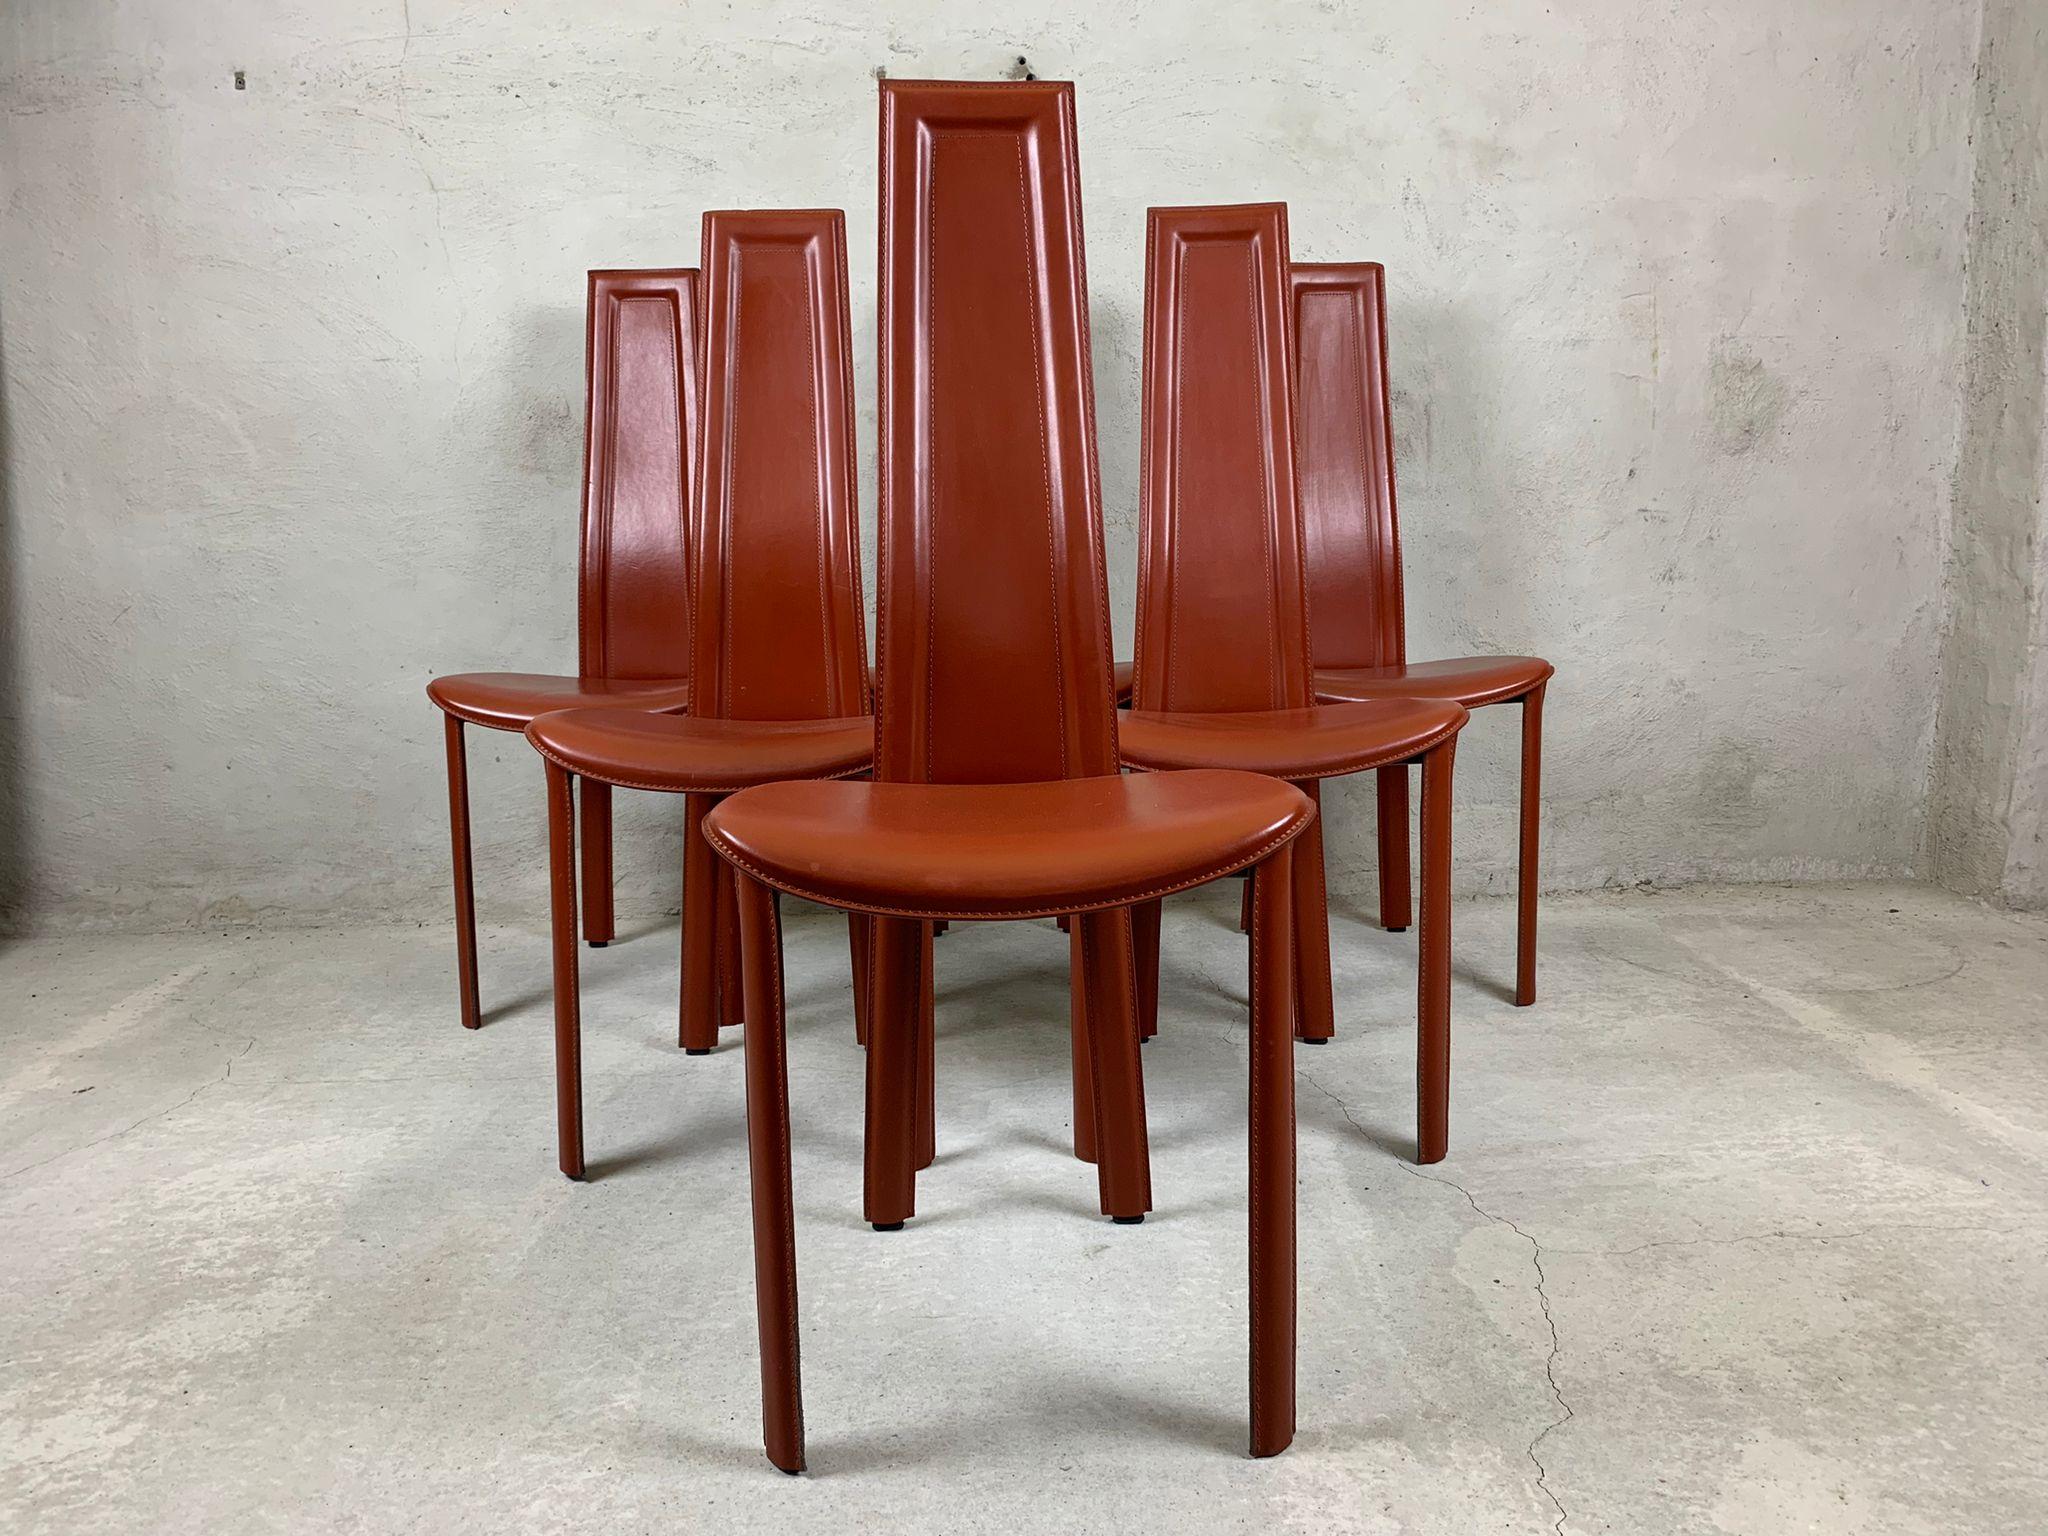 Post-Modern Set Of 6 High Back Dining Room Chairs By Arper For Sale